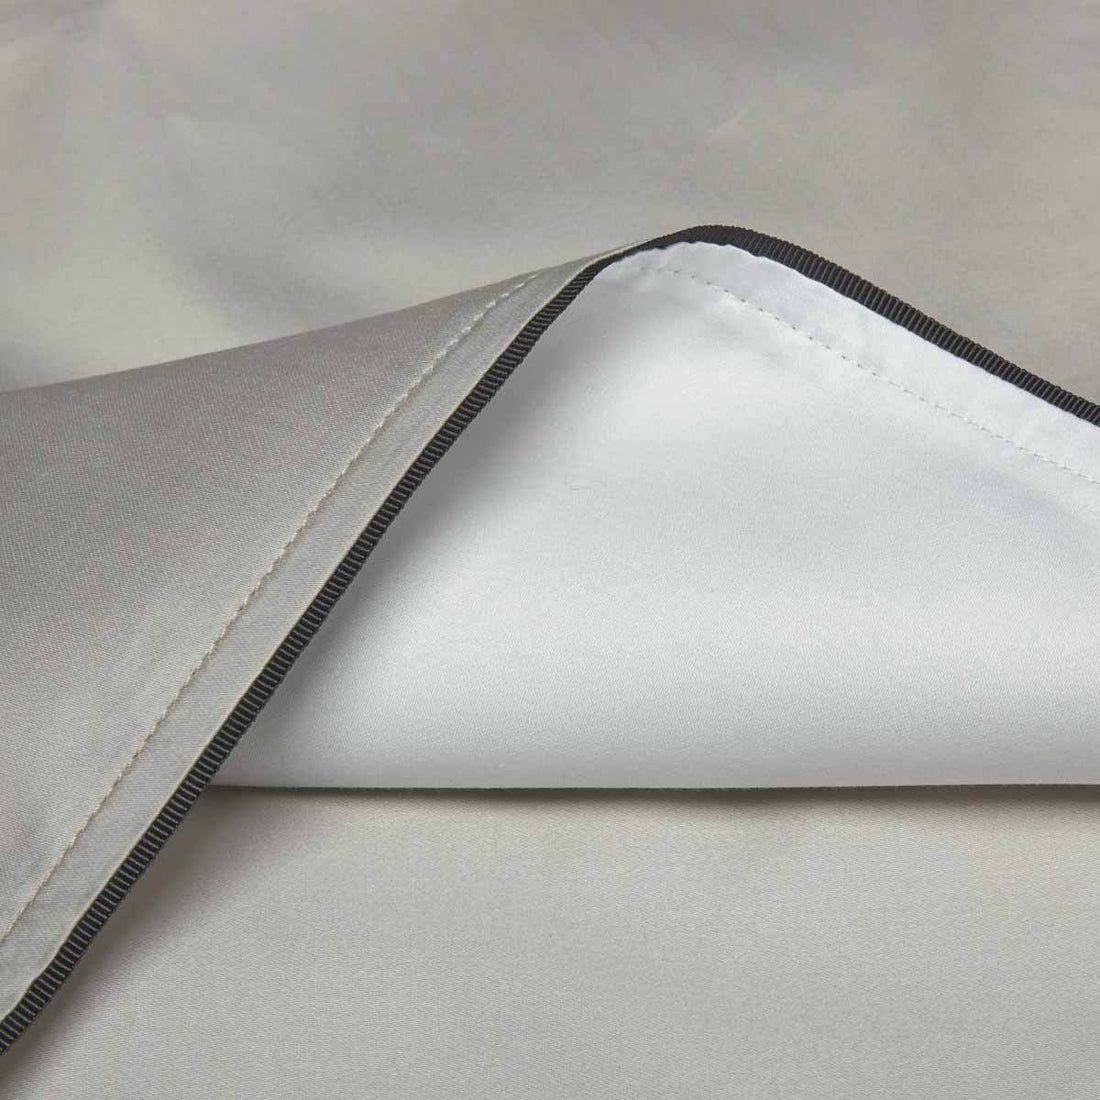 Have you Discovered our Silver & Ivory Bed Linen?